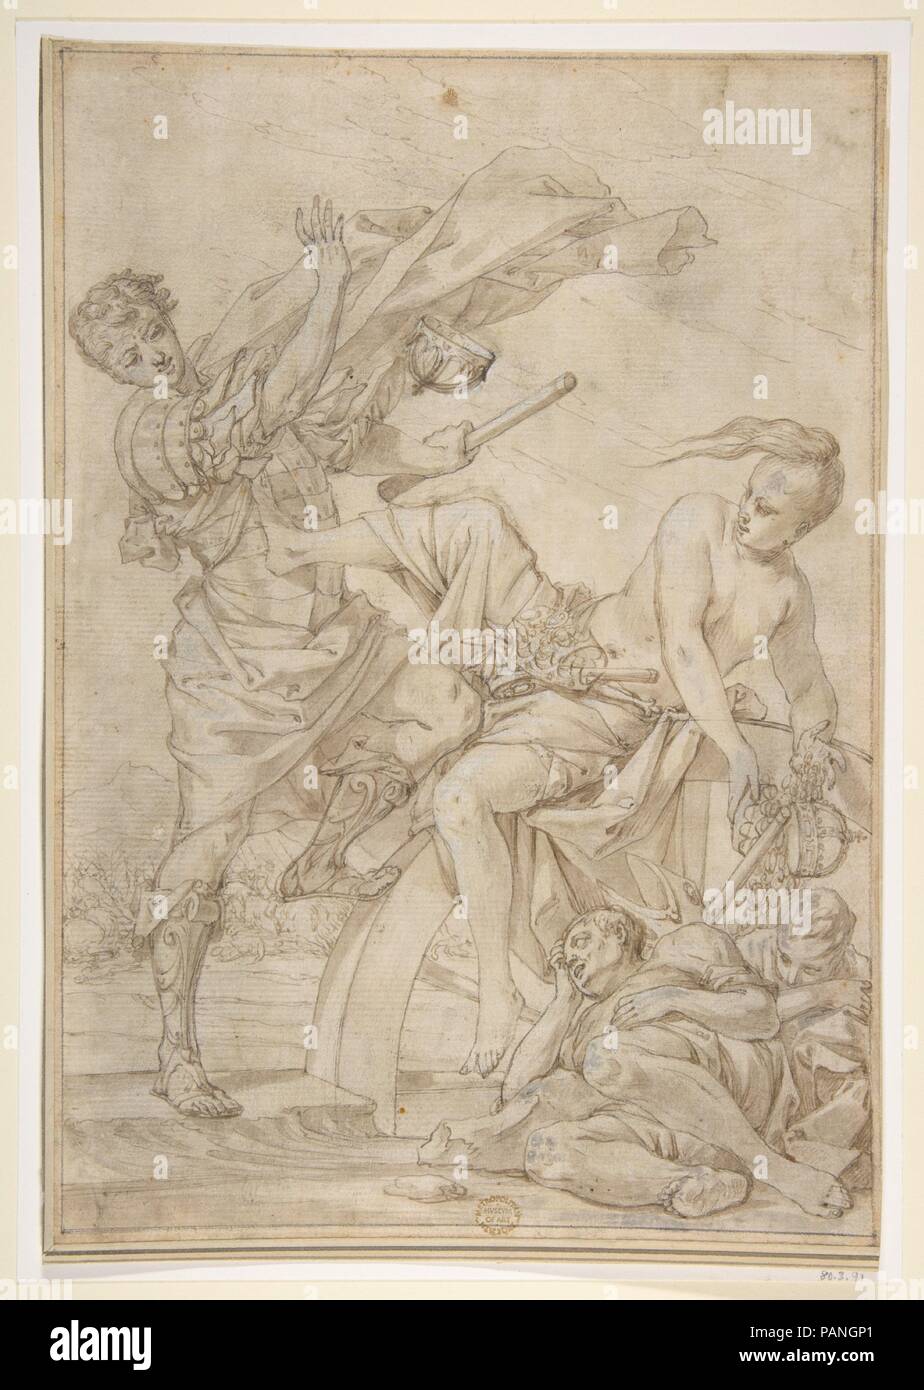 Allegory of Fortune. Artist: attributed to Pietro Testa (Italian, Lucca 1612-1650 Rome). Dimensions: 12 x 8 3/8in. (30.5 x 21.3cm). Date: 1612-50. Museum: Metropolitan Museum of Art, New York, USA. Stock Photo